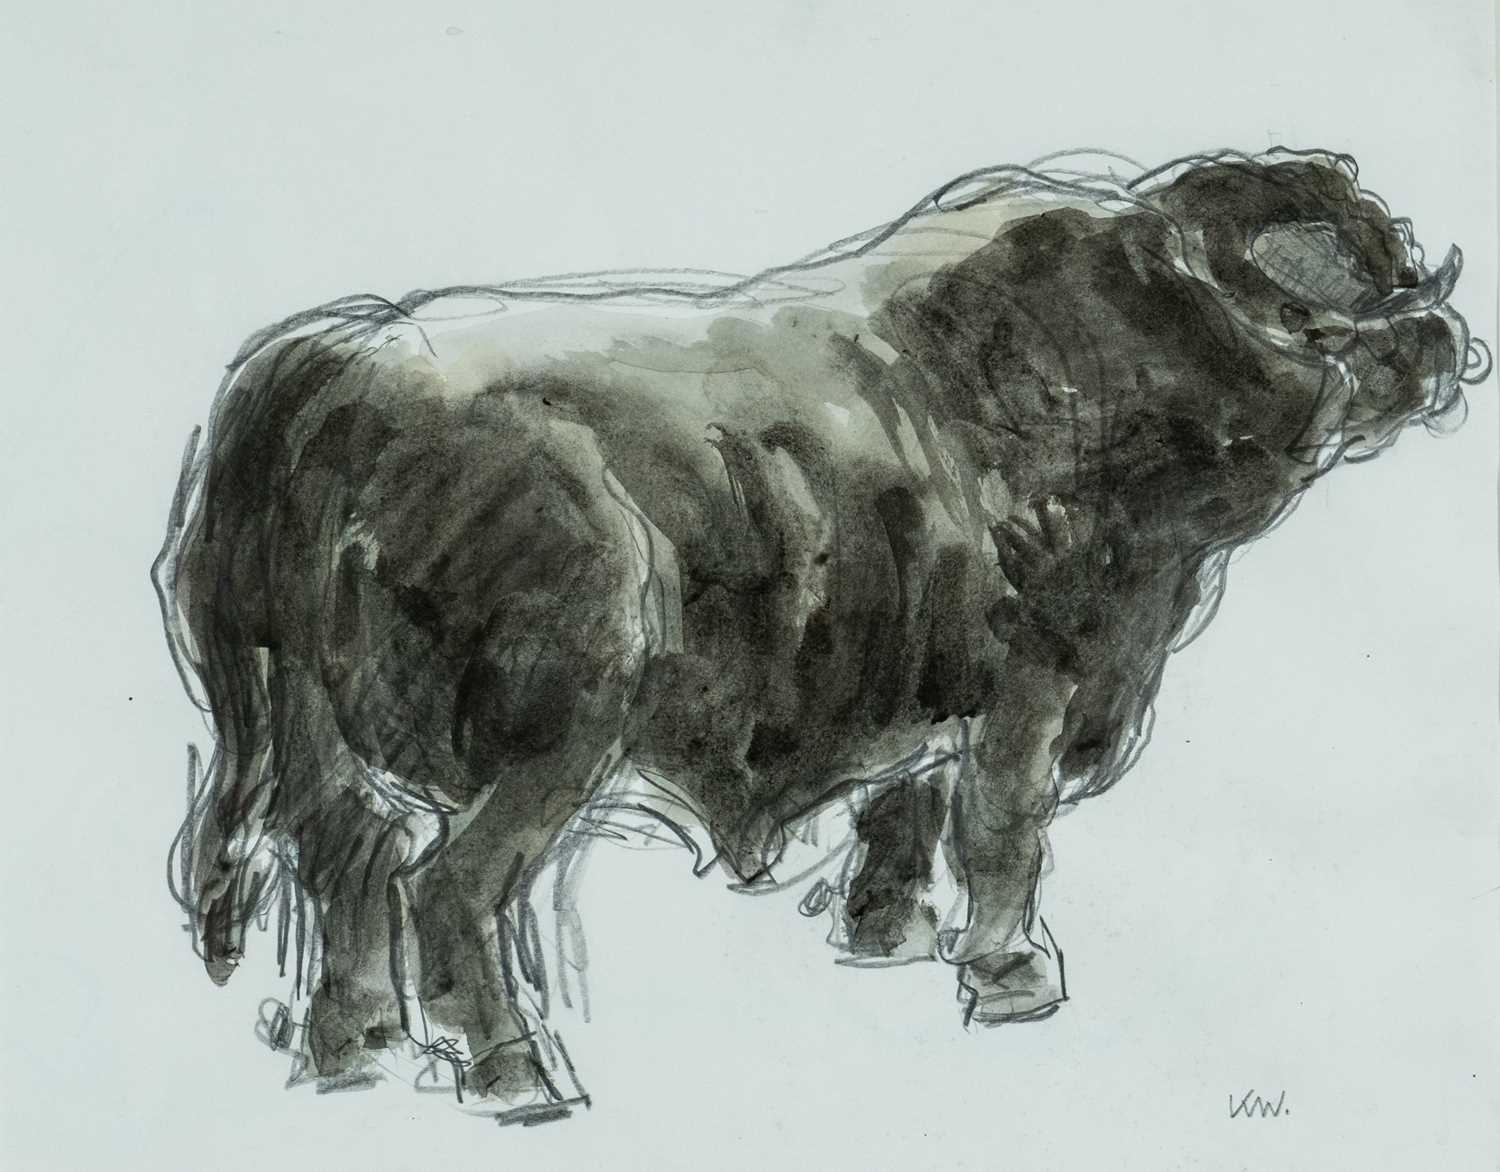 ‡ SIR KYFFIN WILLIAMS RA pencil and watercolour - entitled verso, 'Welsh Black Bull' on Thackeray